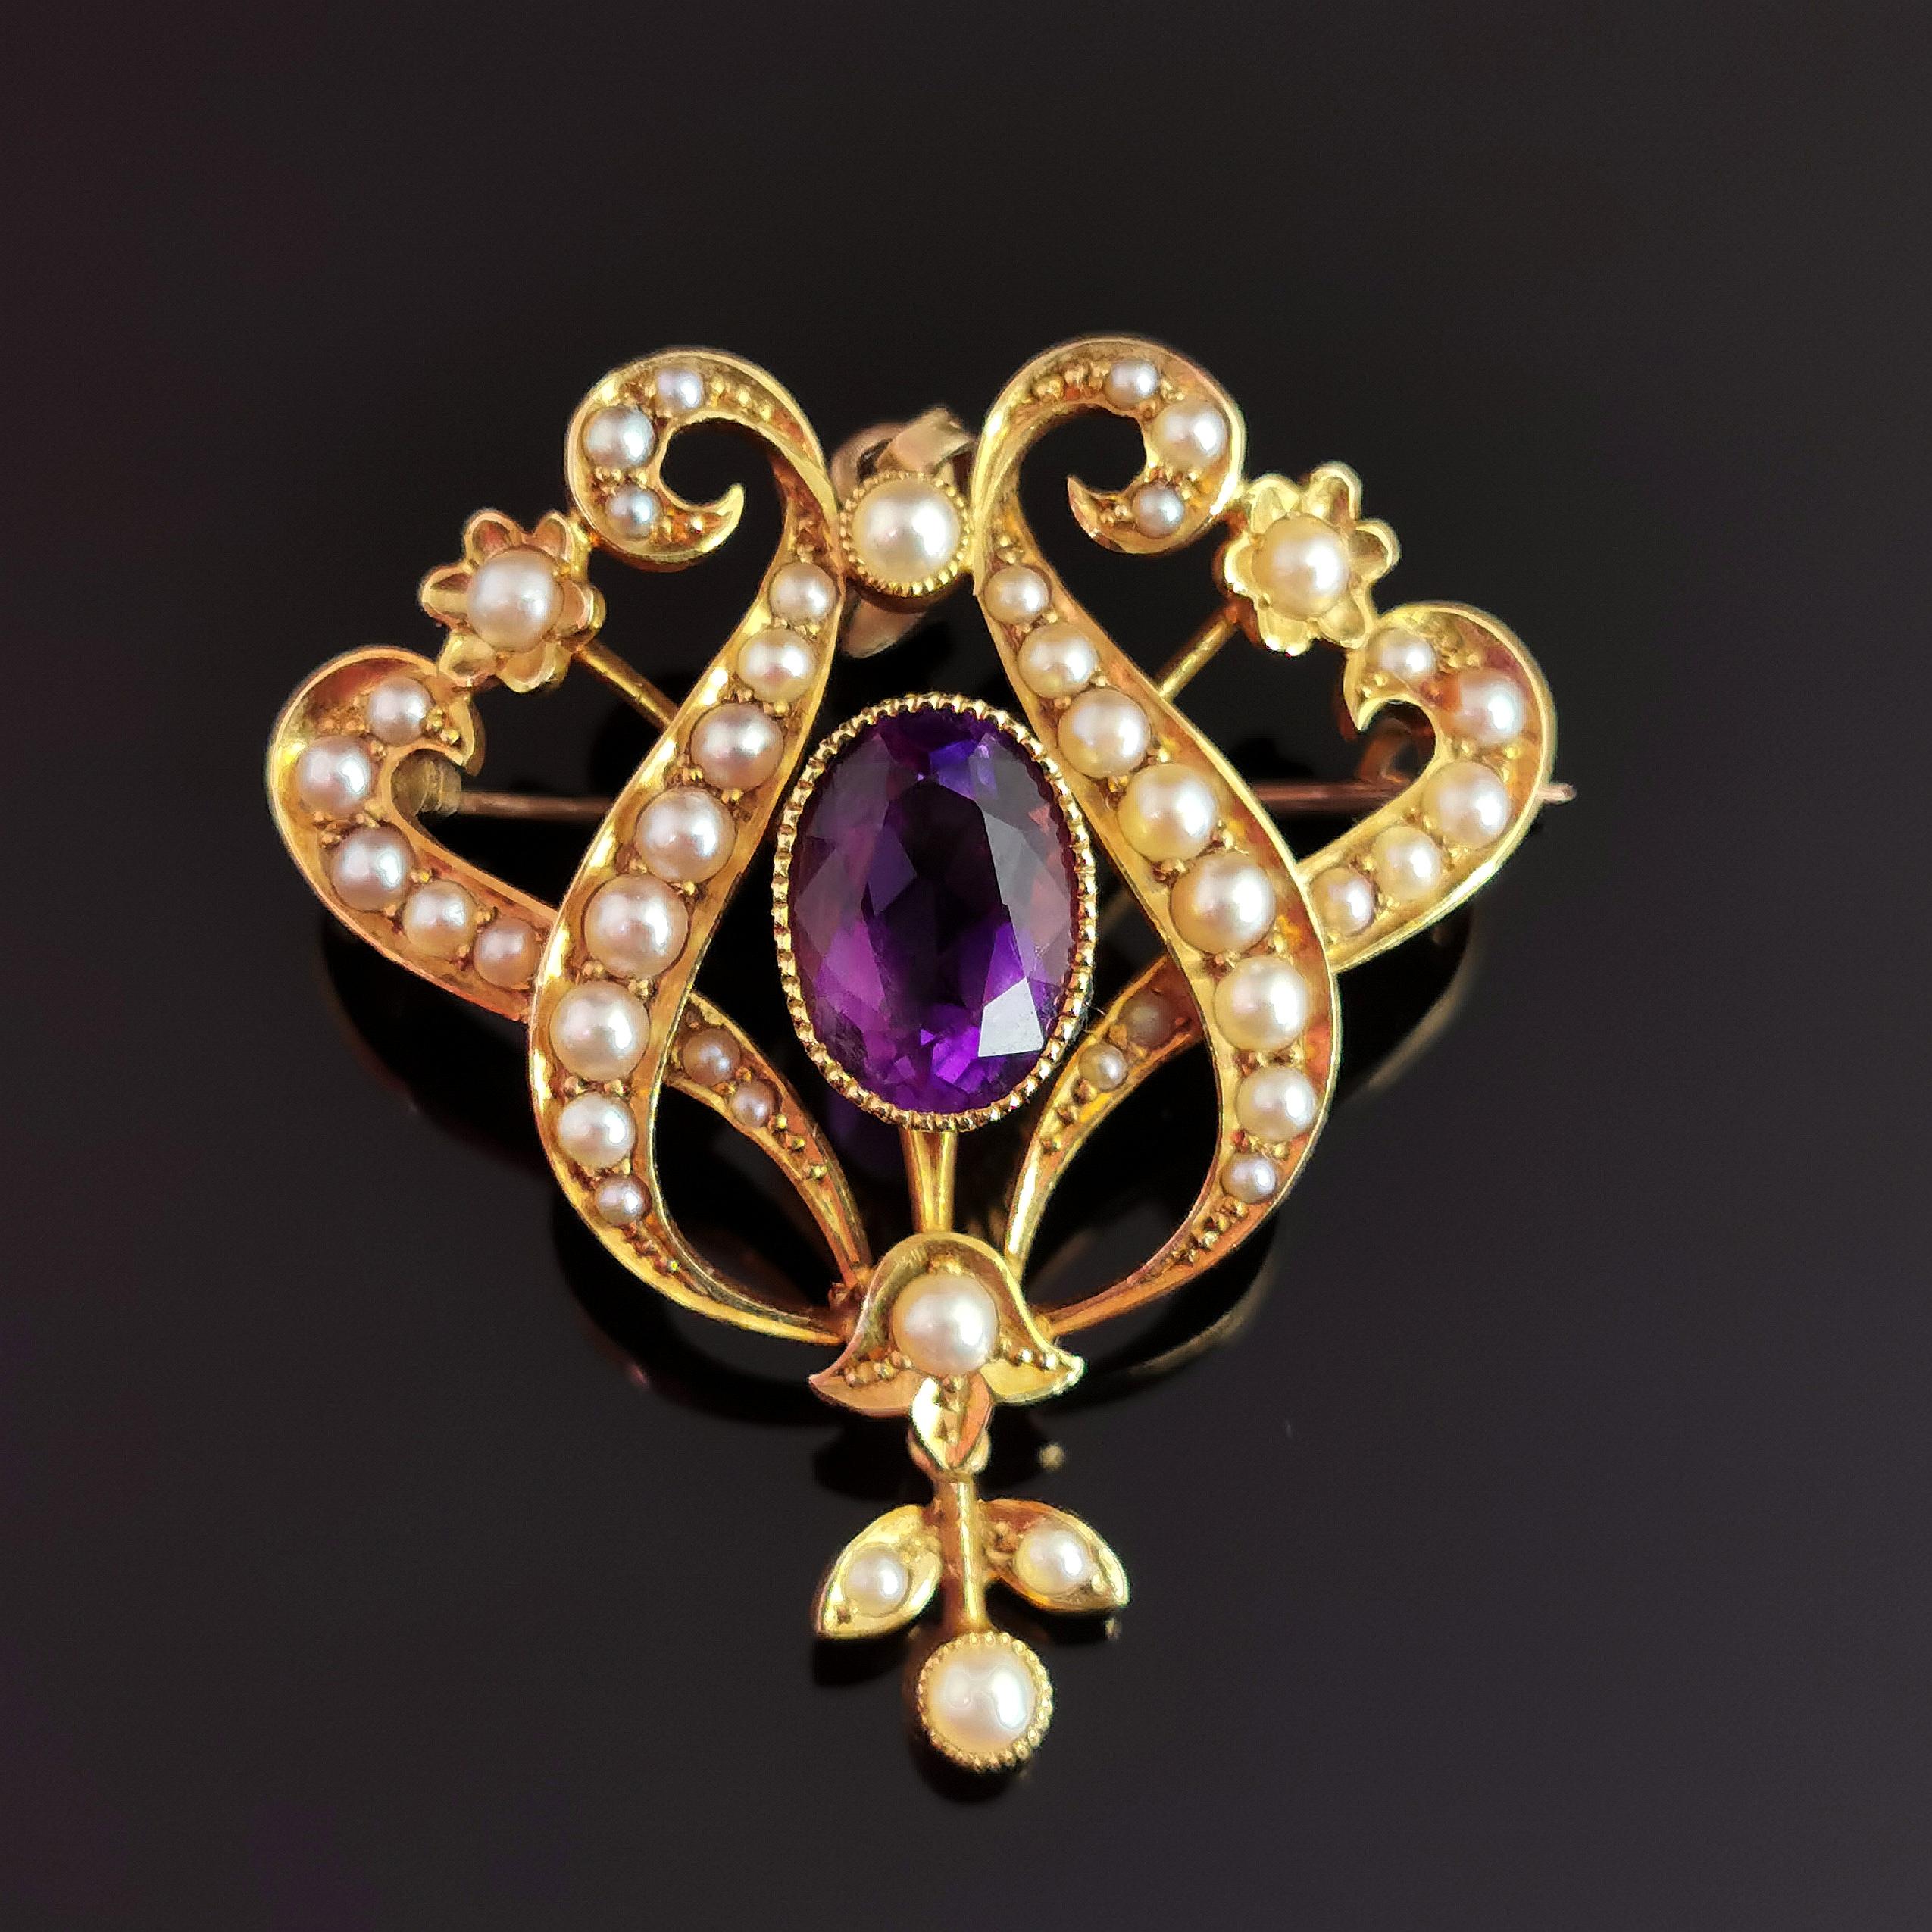 Antique Art Nouveau Amethyst and Pearl Pendant Brooch, 15kt Yellow Gold 11